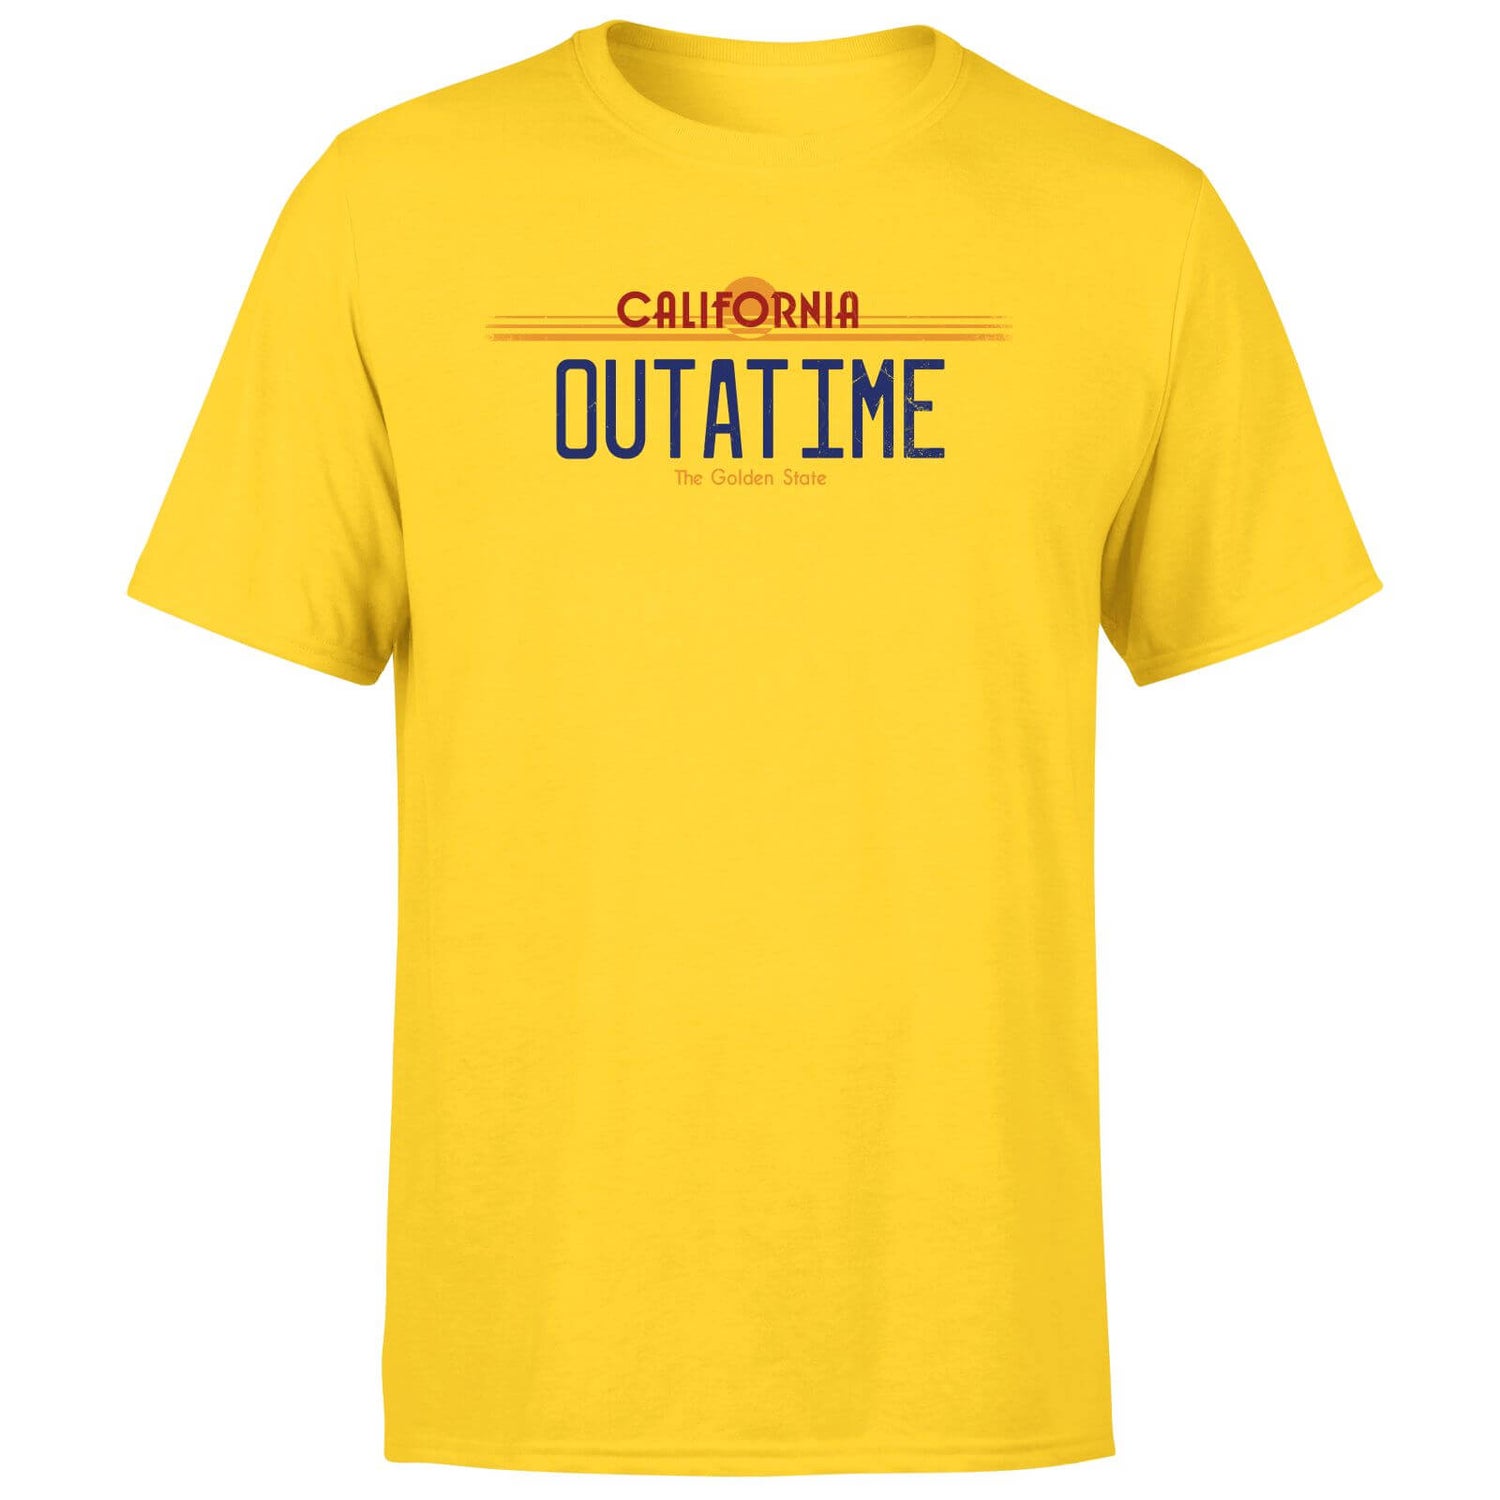 Back to The Future Outatime Plate Men's T-Shirt - Yellow - M - Yellow